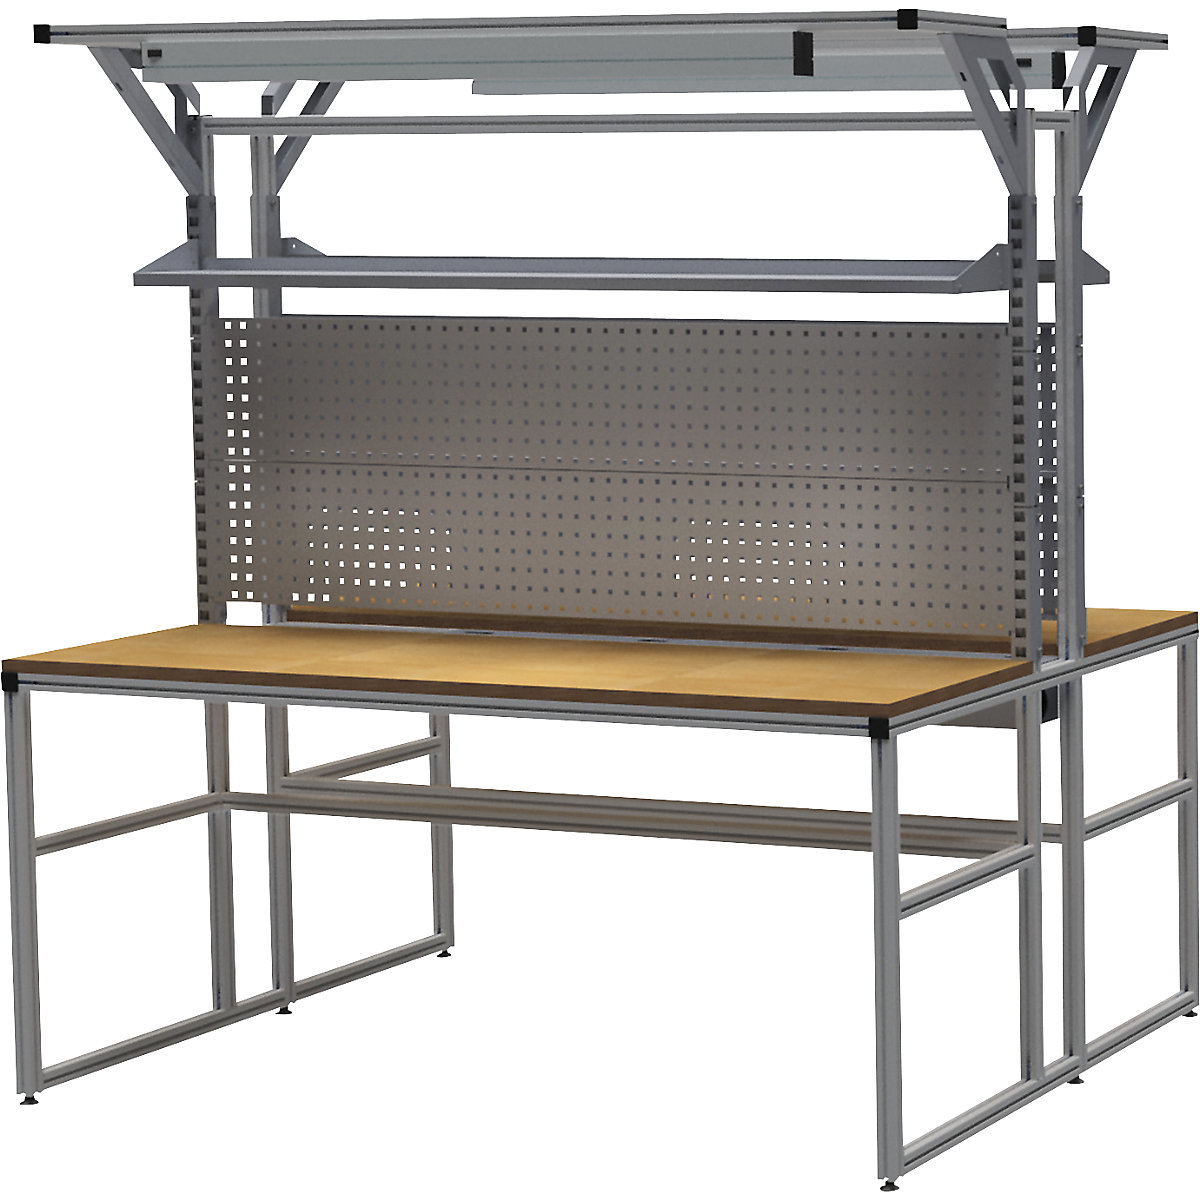 Adjustable Workbench: Types, Uses, Features and Benefits